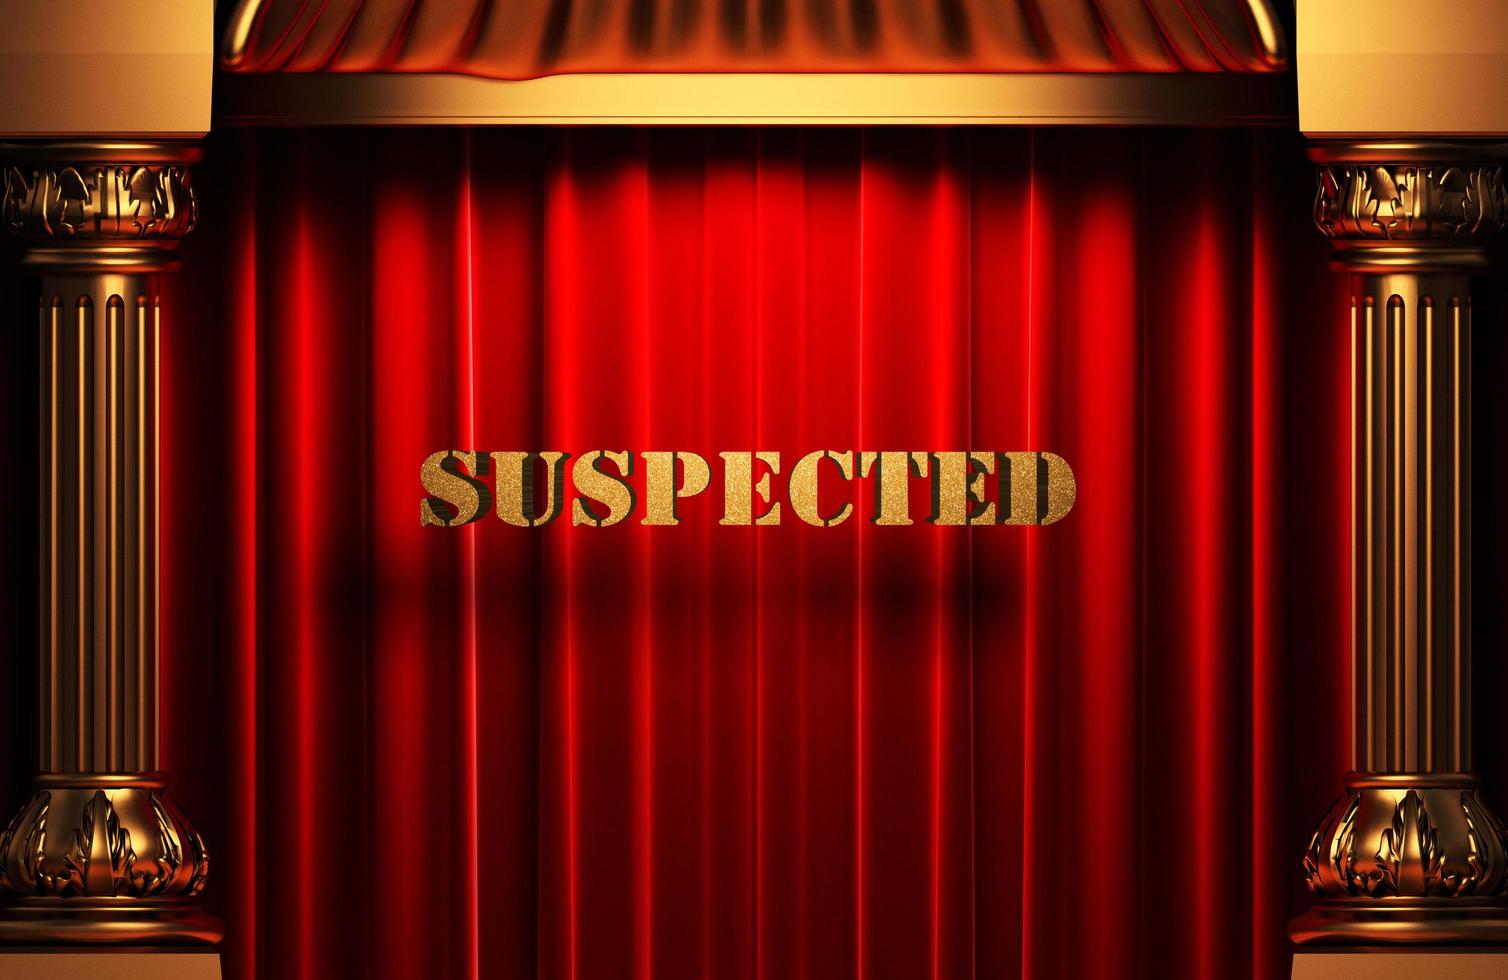 suspected golden word on red curtain photo